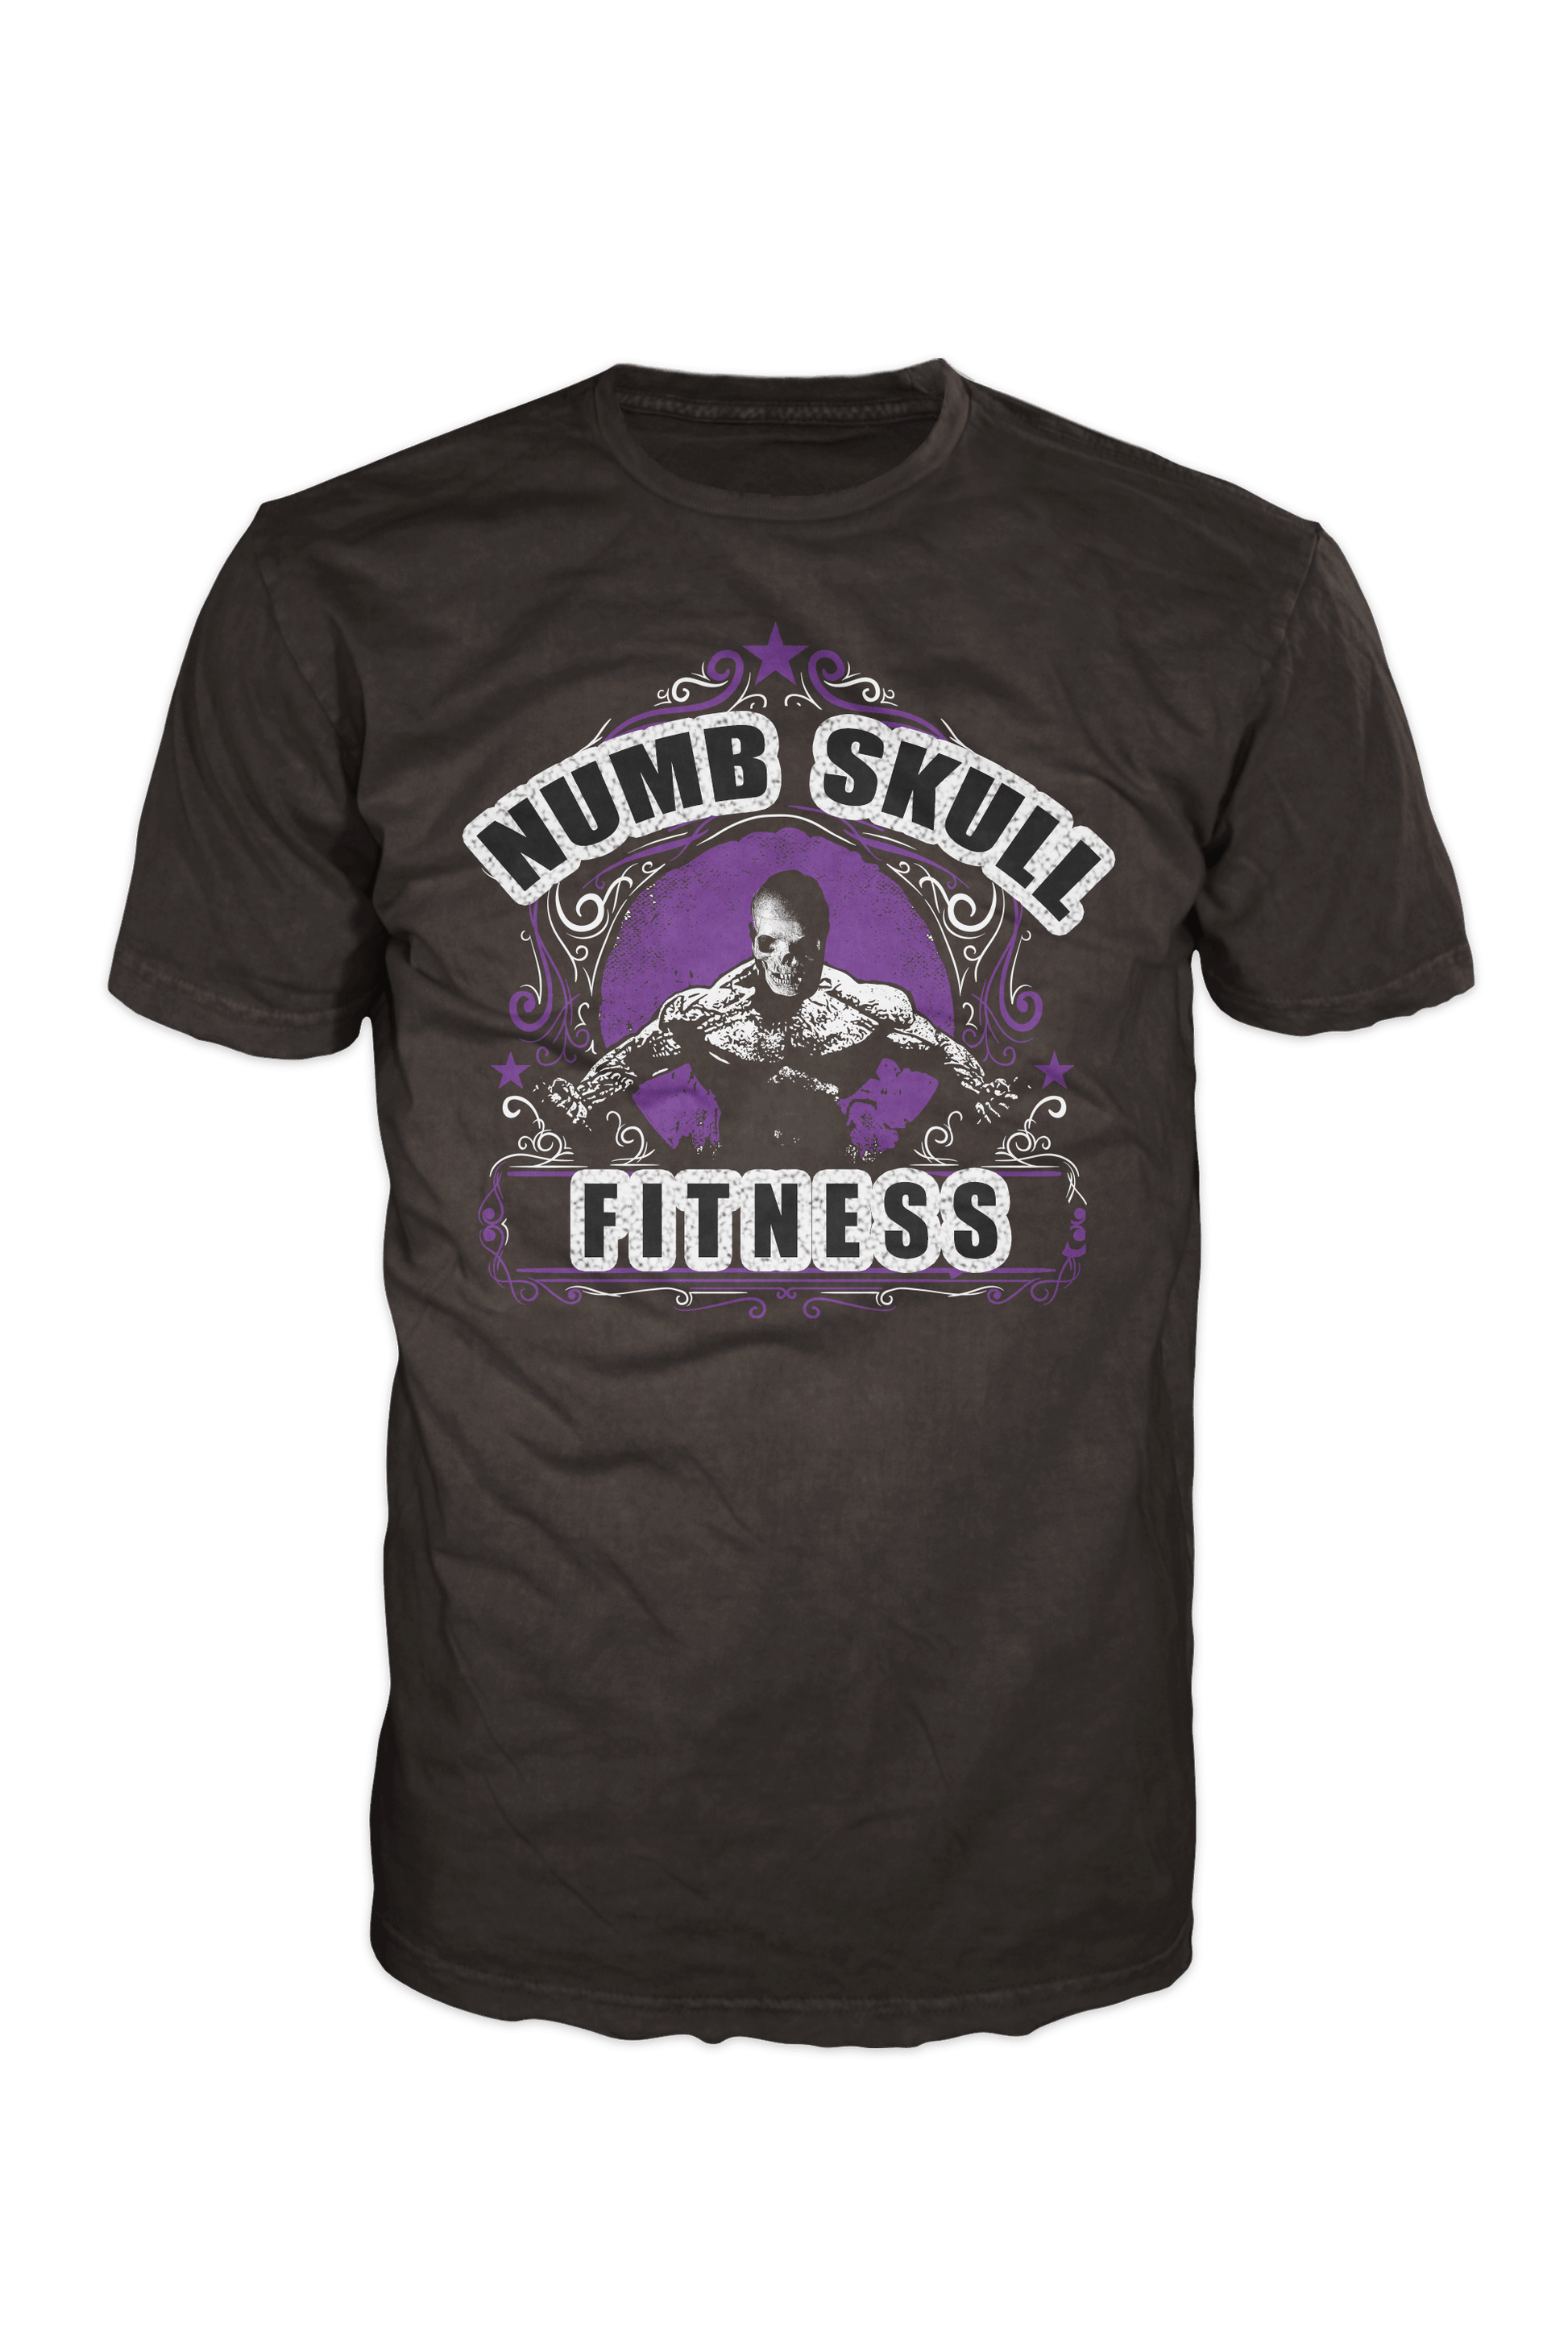 Numb Skull Designs fitness graphic tshirt with color purple